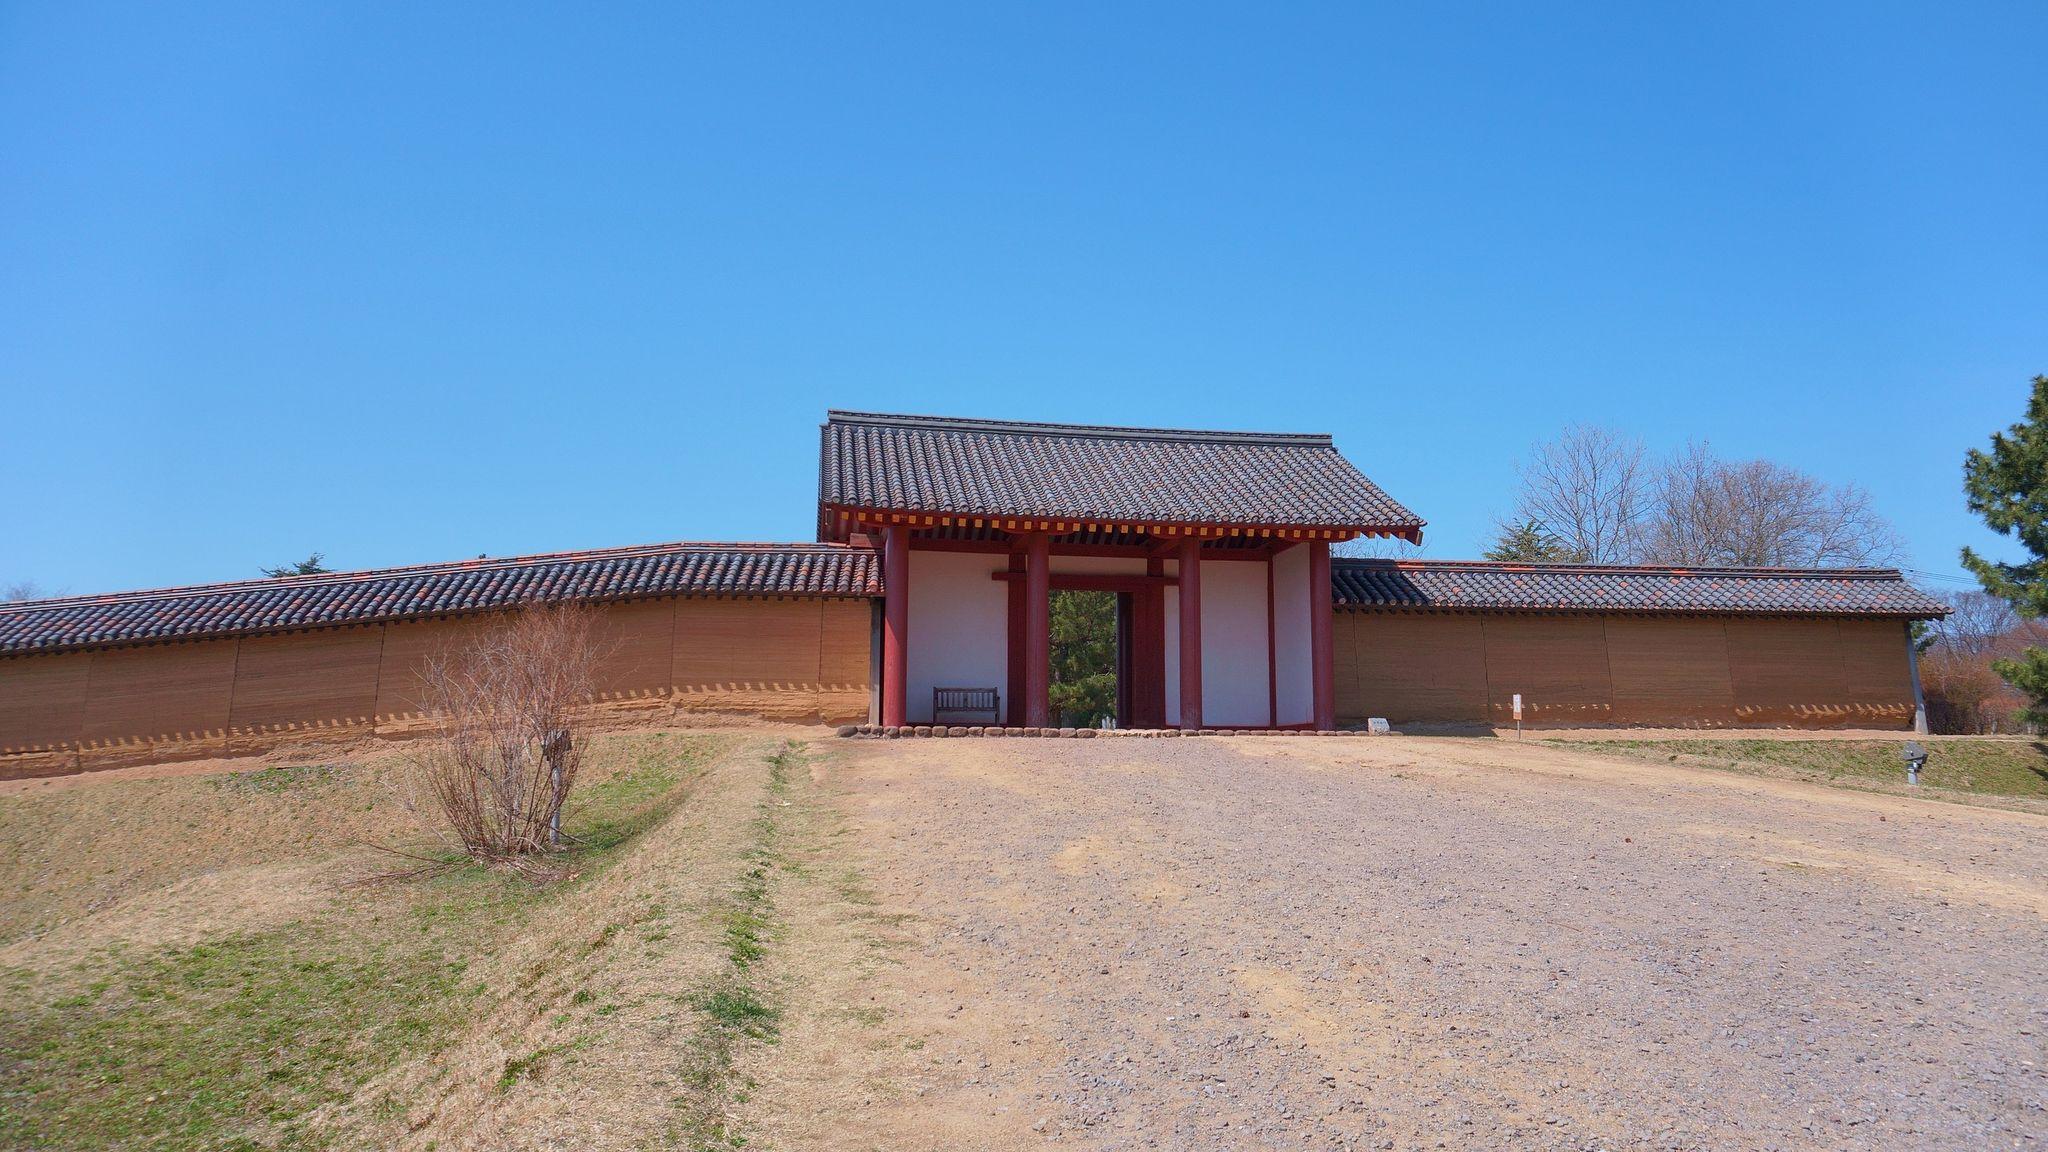 Reconstructed East Gate of Akita Castle